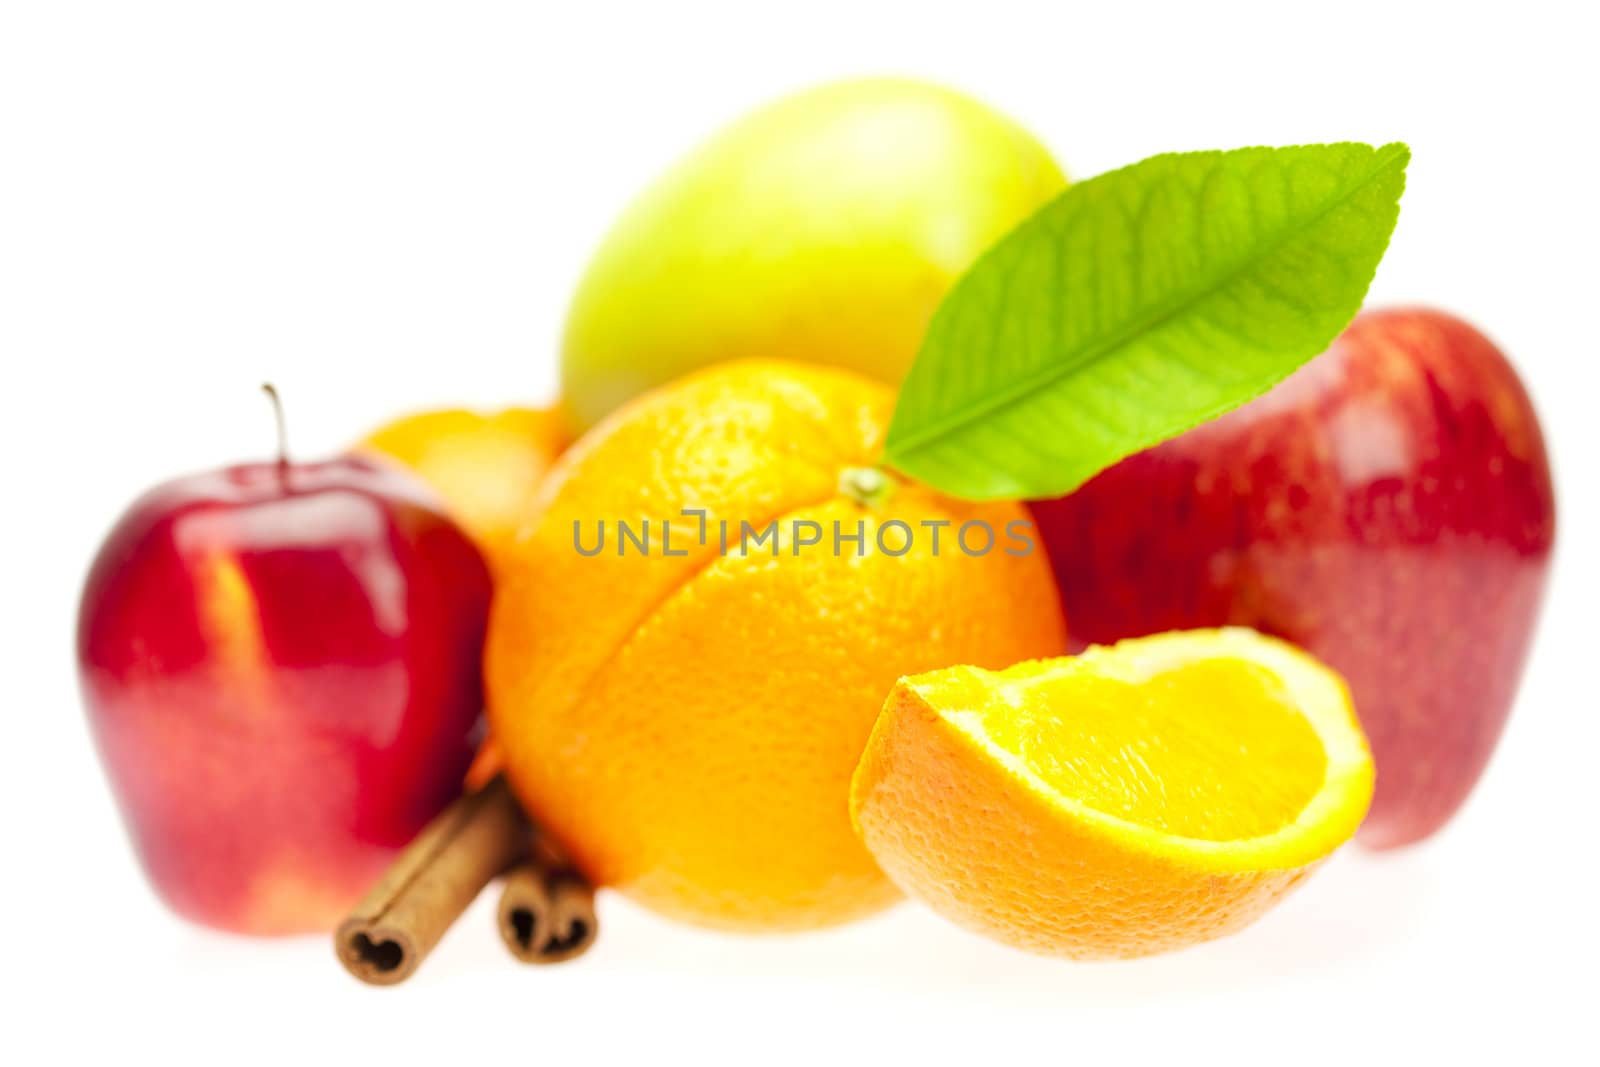 oranges, cinnamon sticks and apples isolated on white